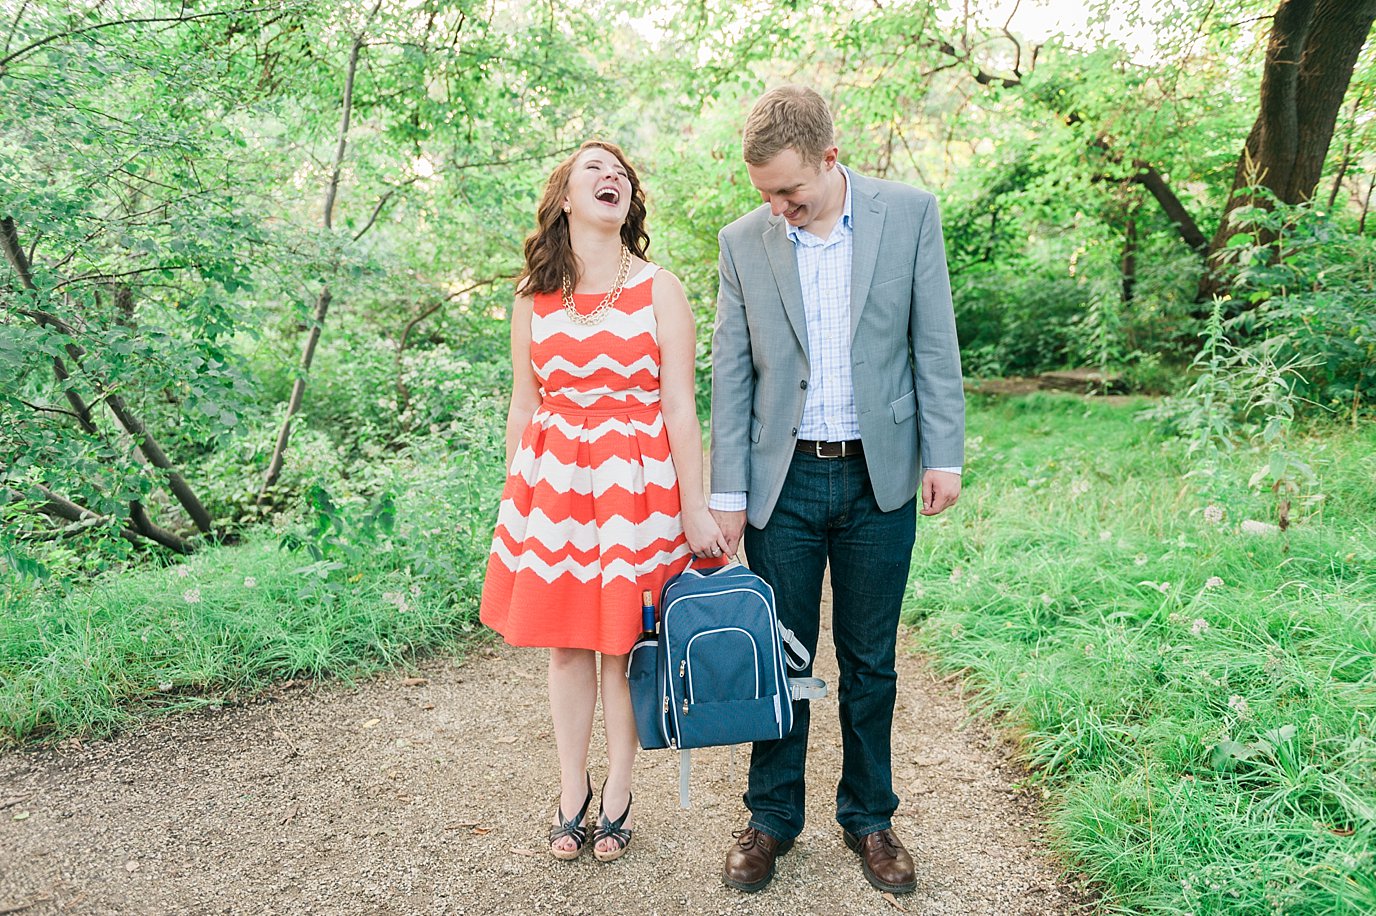 lily_pond_lincoln_park_engagement_session_0054.jpg